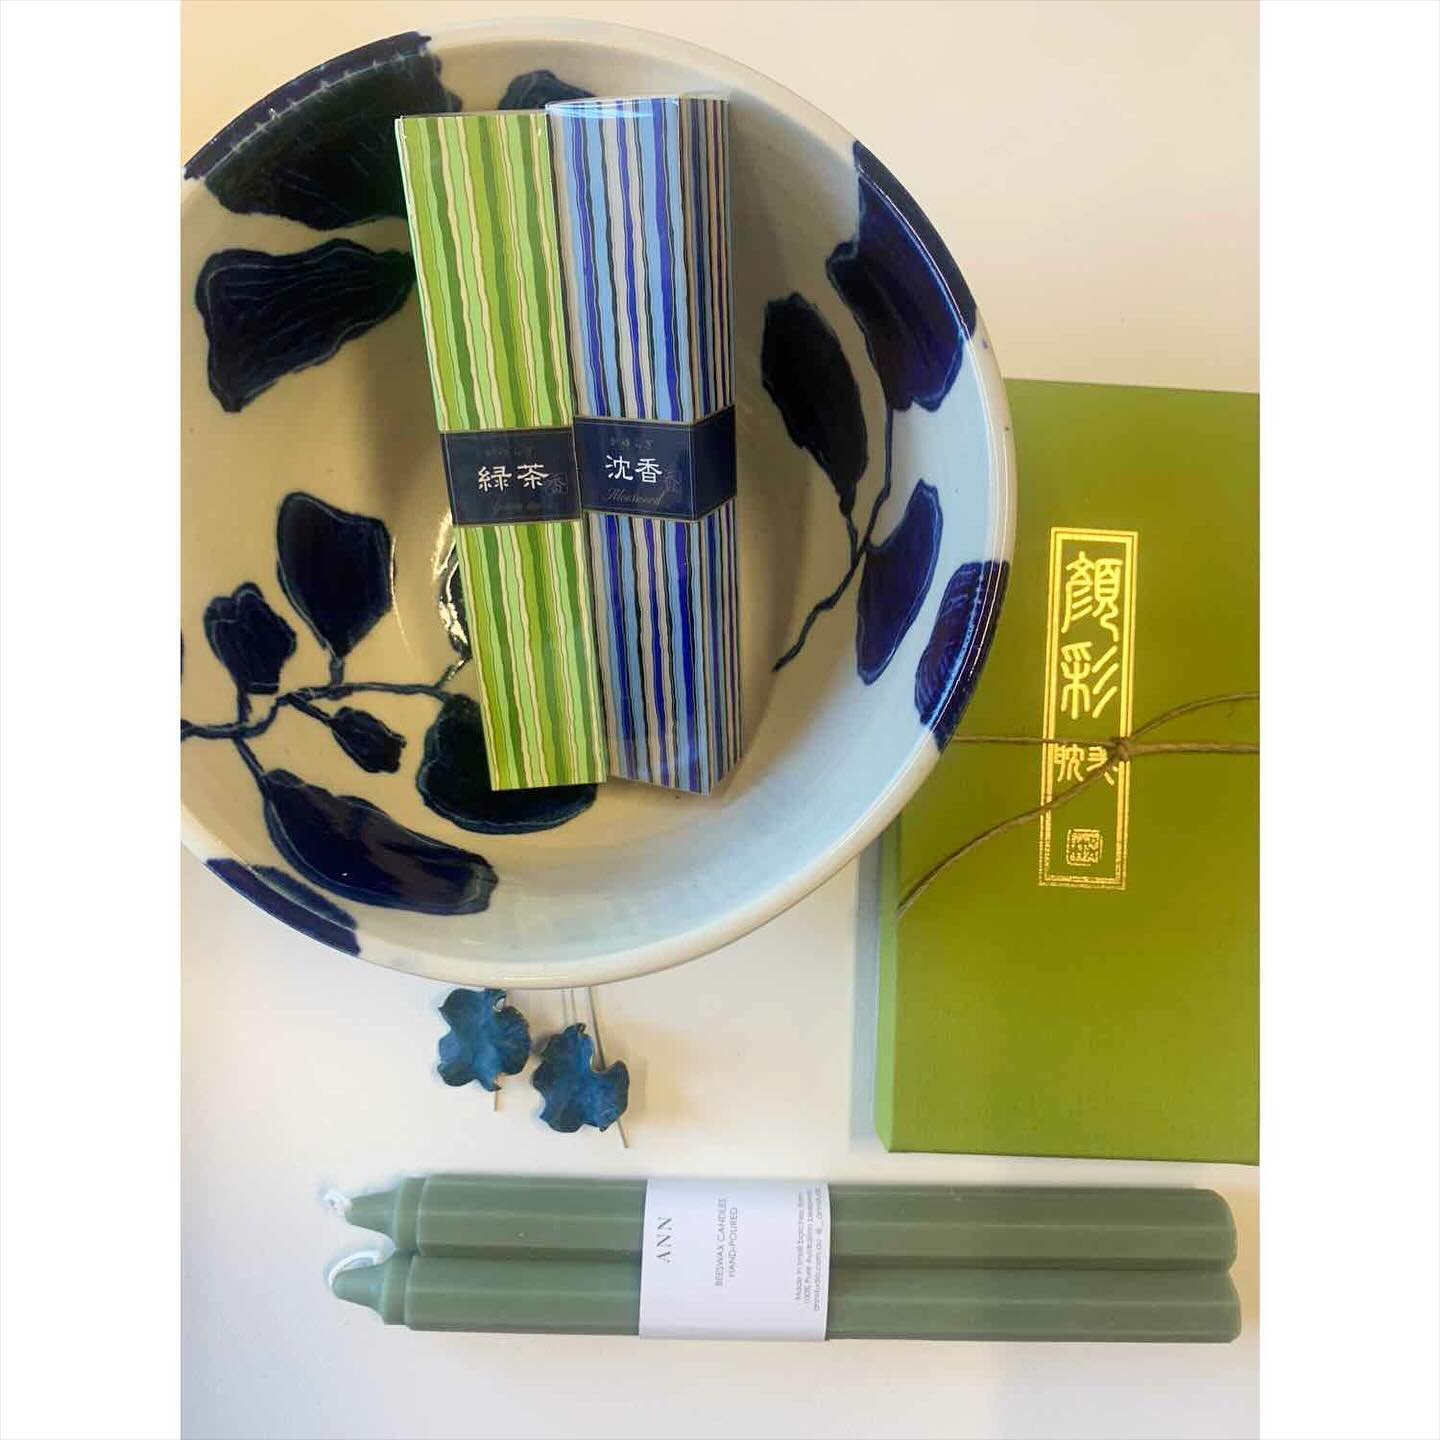 Caroline&rsquo;s selection for Mother&rsquo;s Day: Japanese watercolours &amp; incense, a hand formed &amp; hand painted bowl, beeswax candles &amp; delightfully frilly cobalt blue earrings 💙 and for those who would rather an experience, we have lot